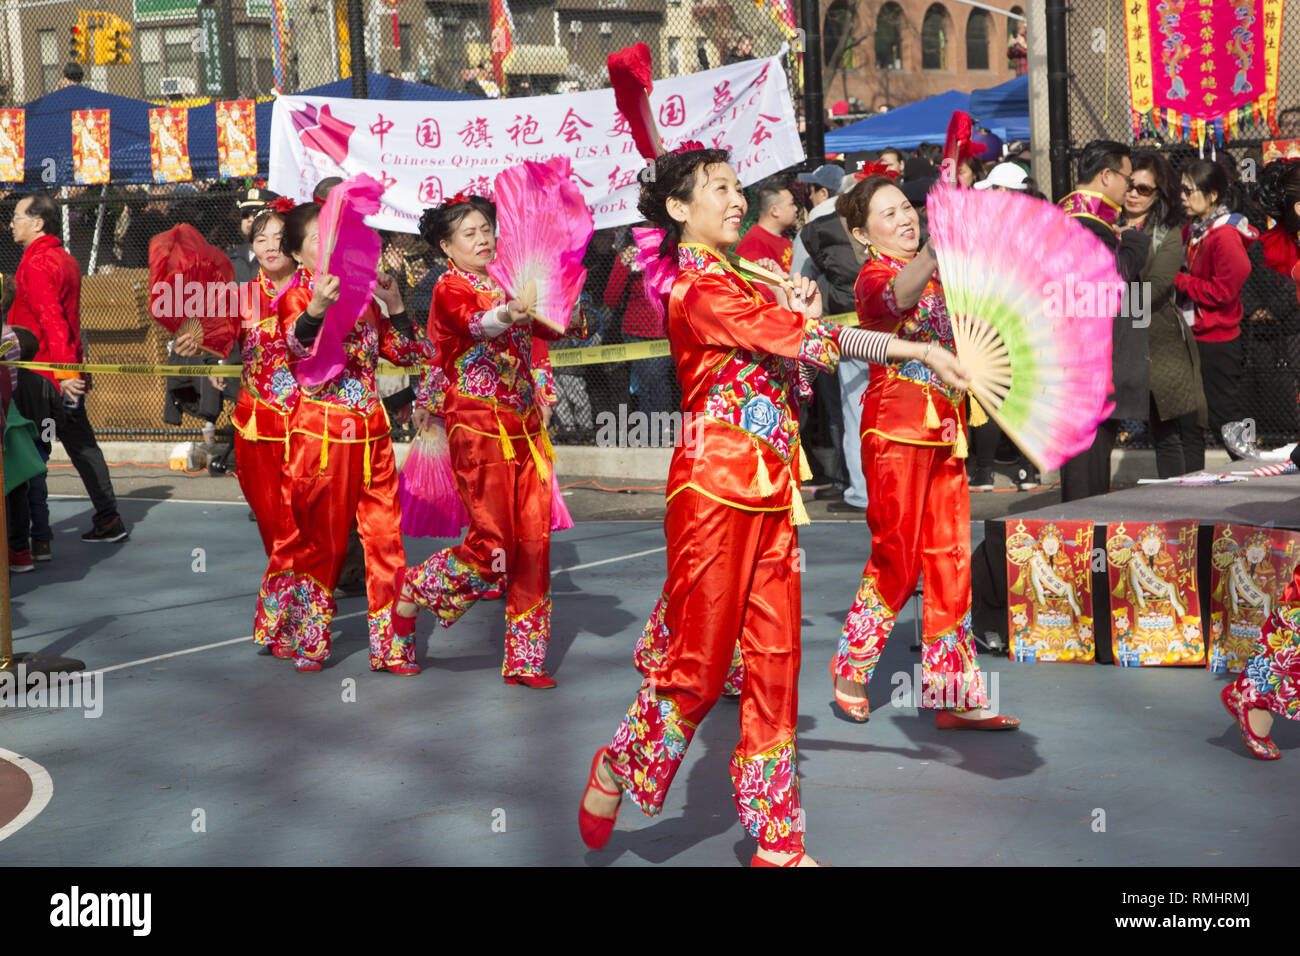 Chinese dancers perform at the Lunar New Year celebration in Sara D ...